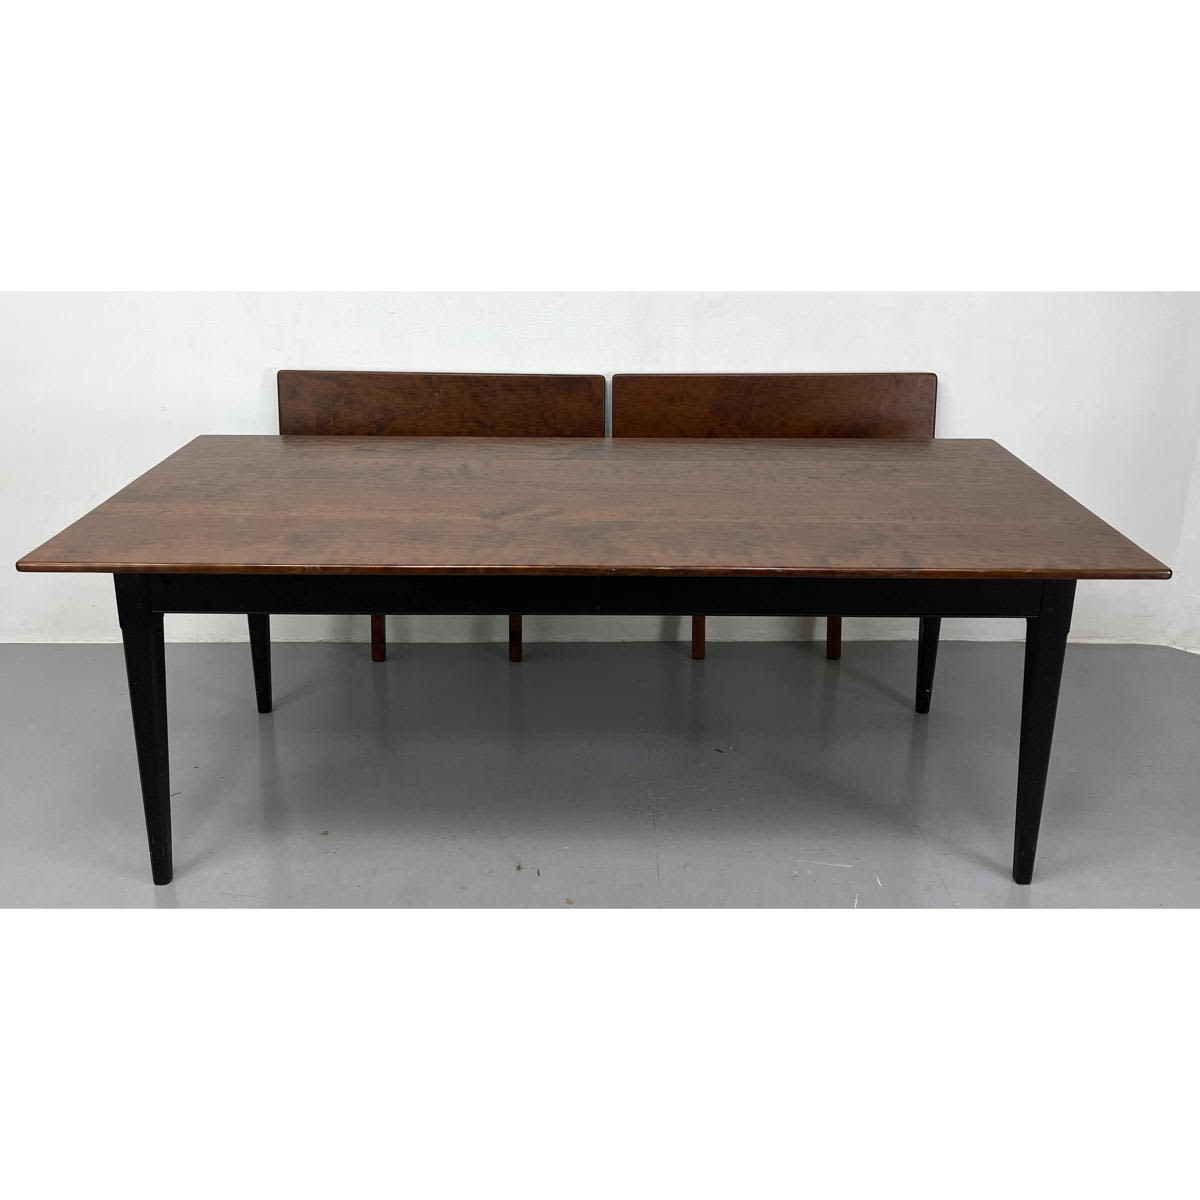 Large Farm Style Dining Table  2ff615